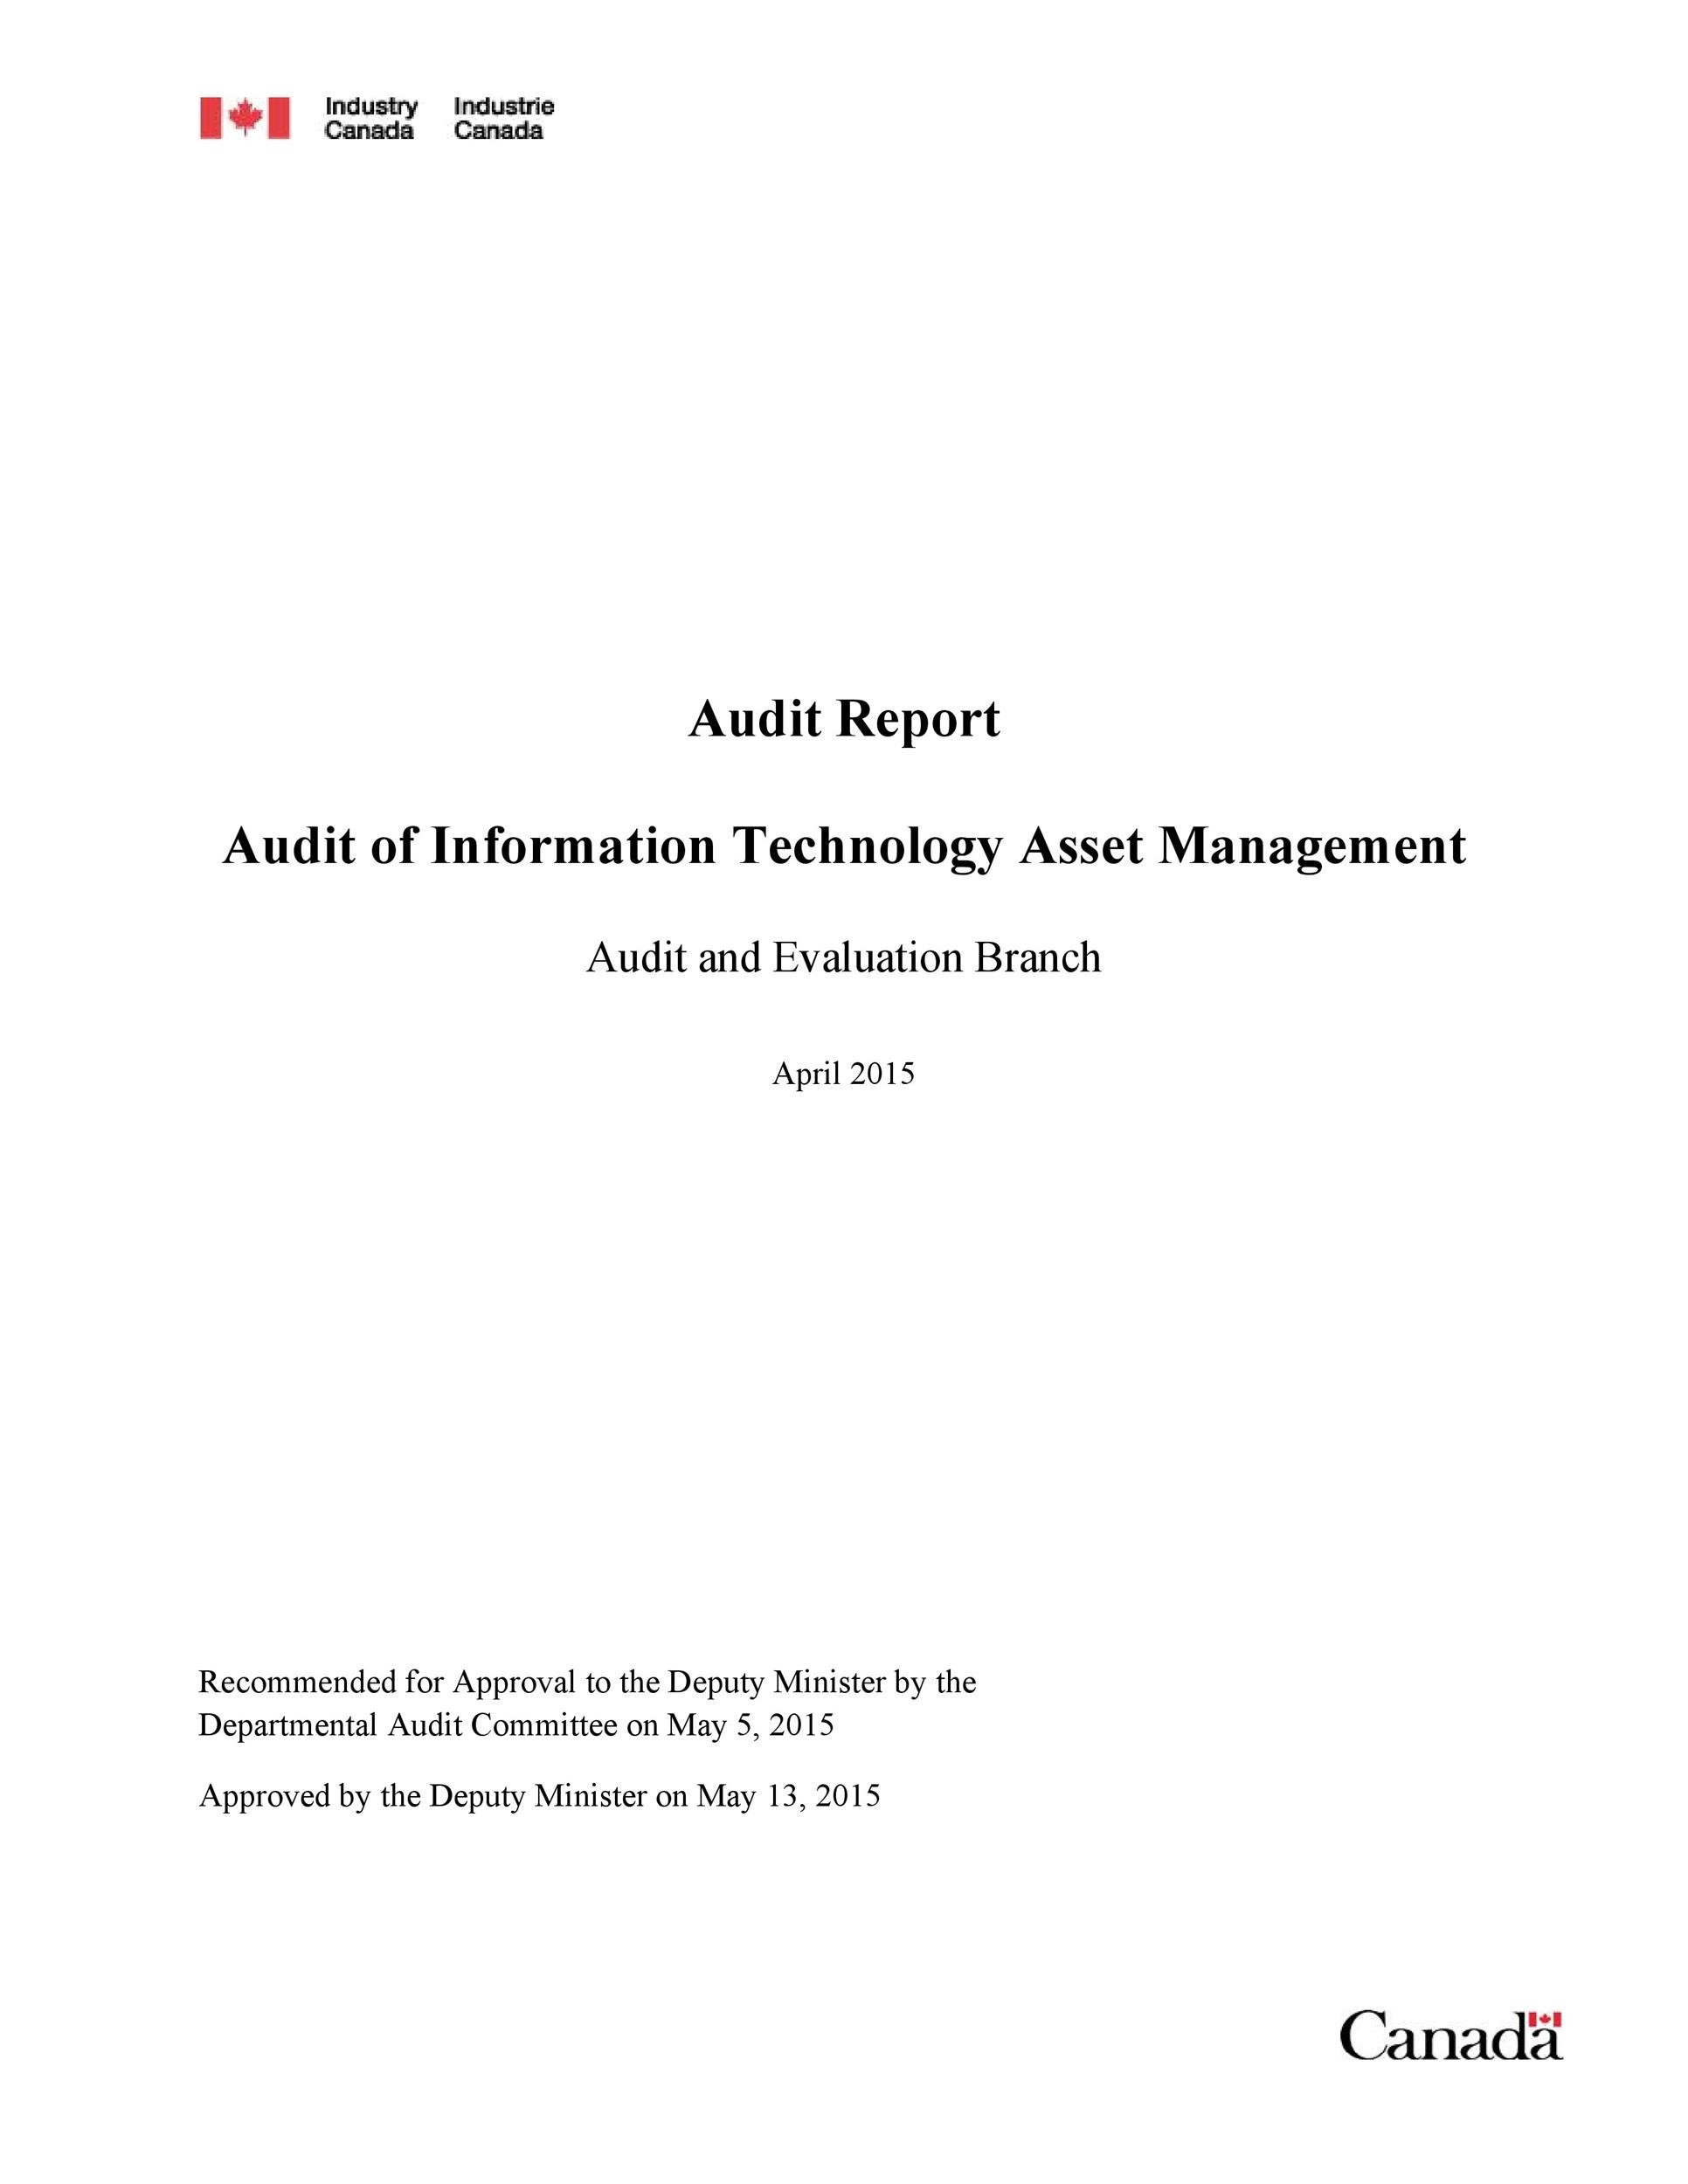 Free audit report template 49